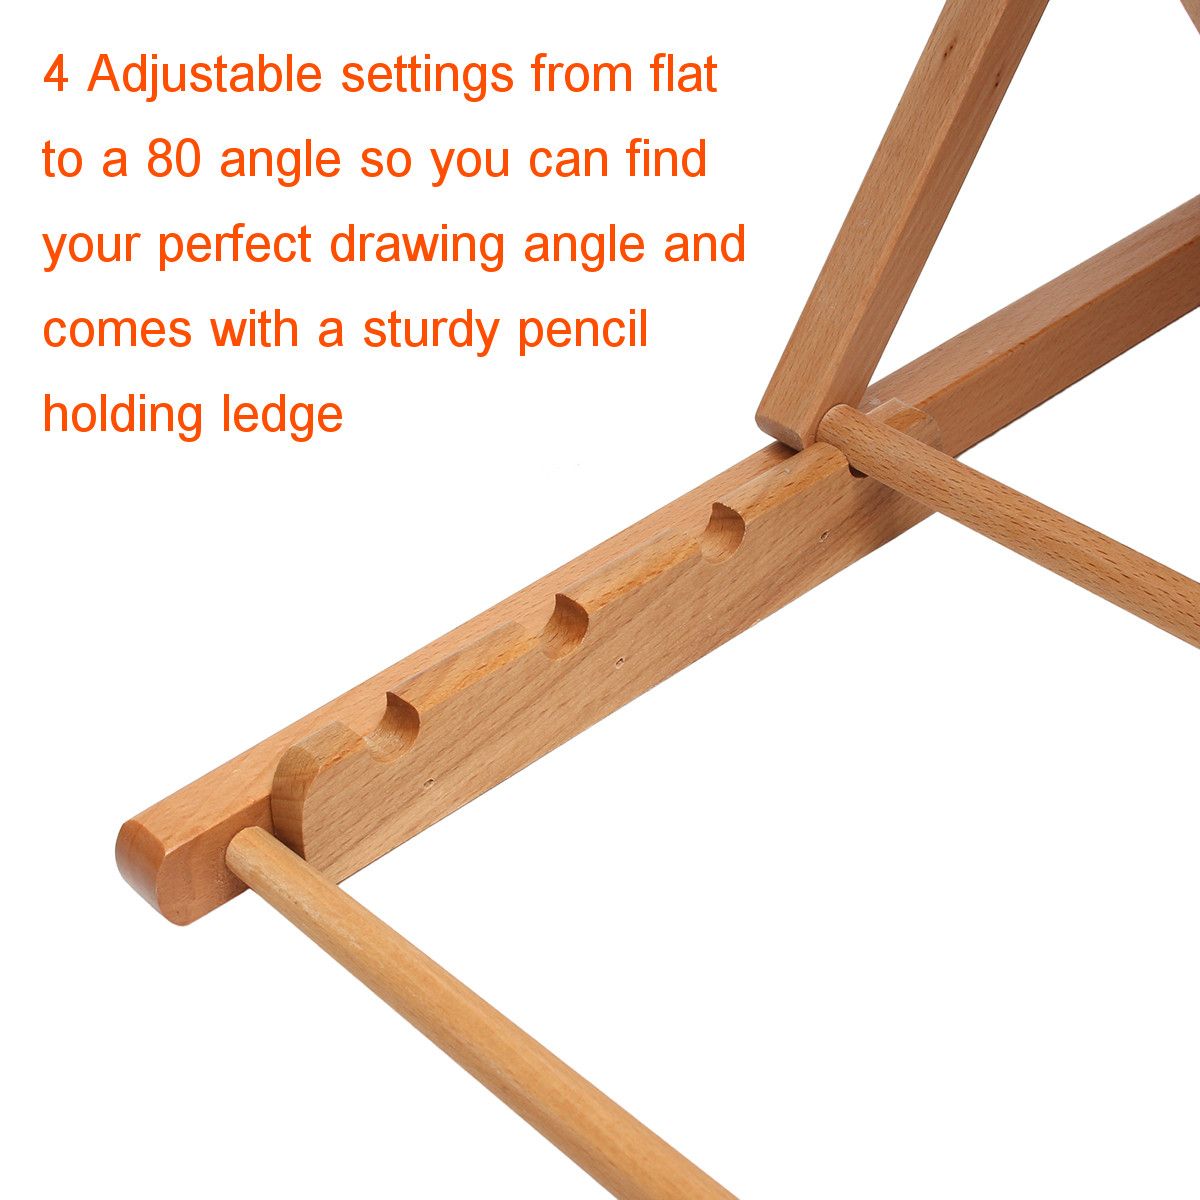 Adjustable-Beech-Wood-Drawing-Storage-Board-Fold-Flat-Sketching-Crafted-With-Elastic-Band-1379567